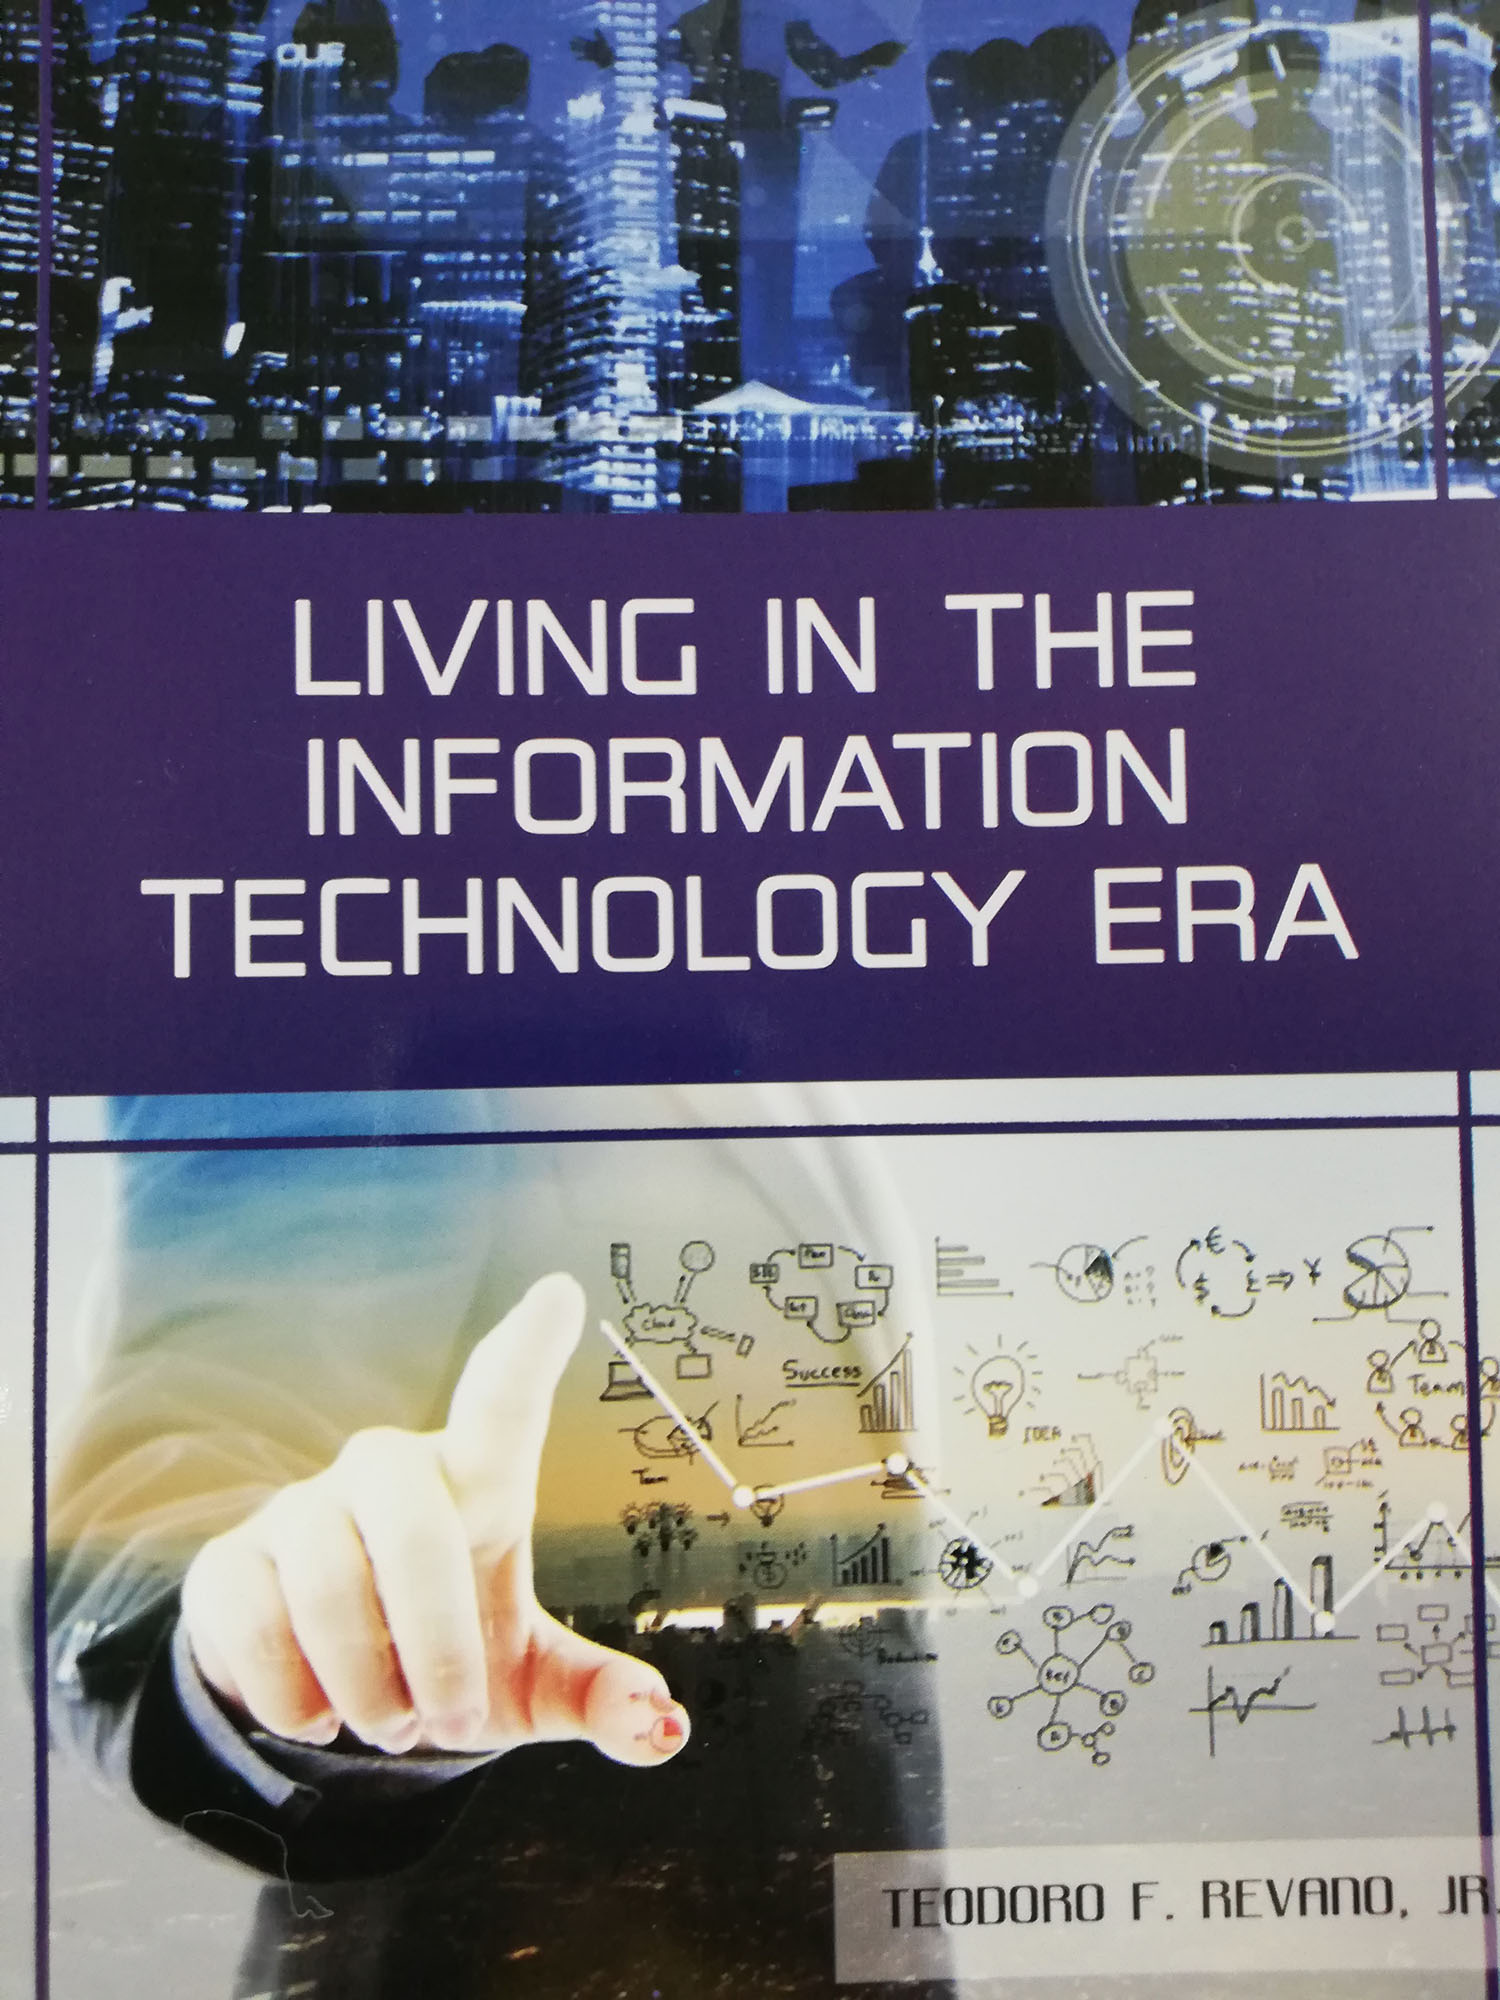 essay about living in the information technology era